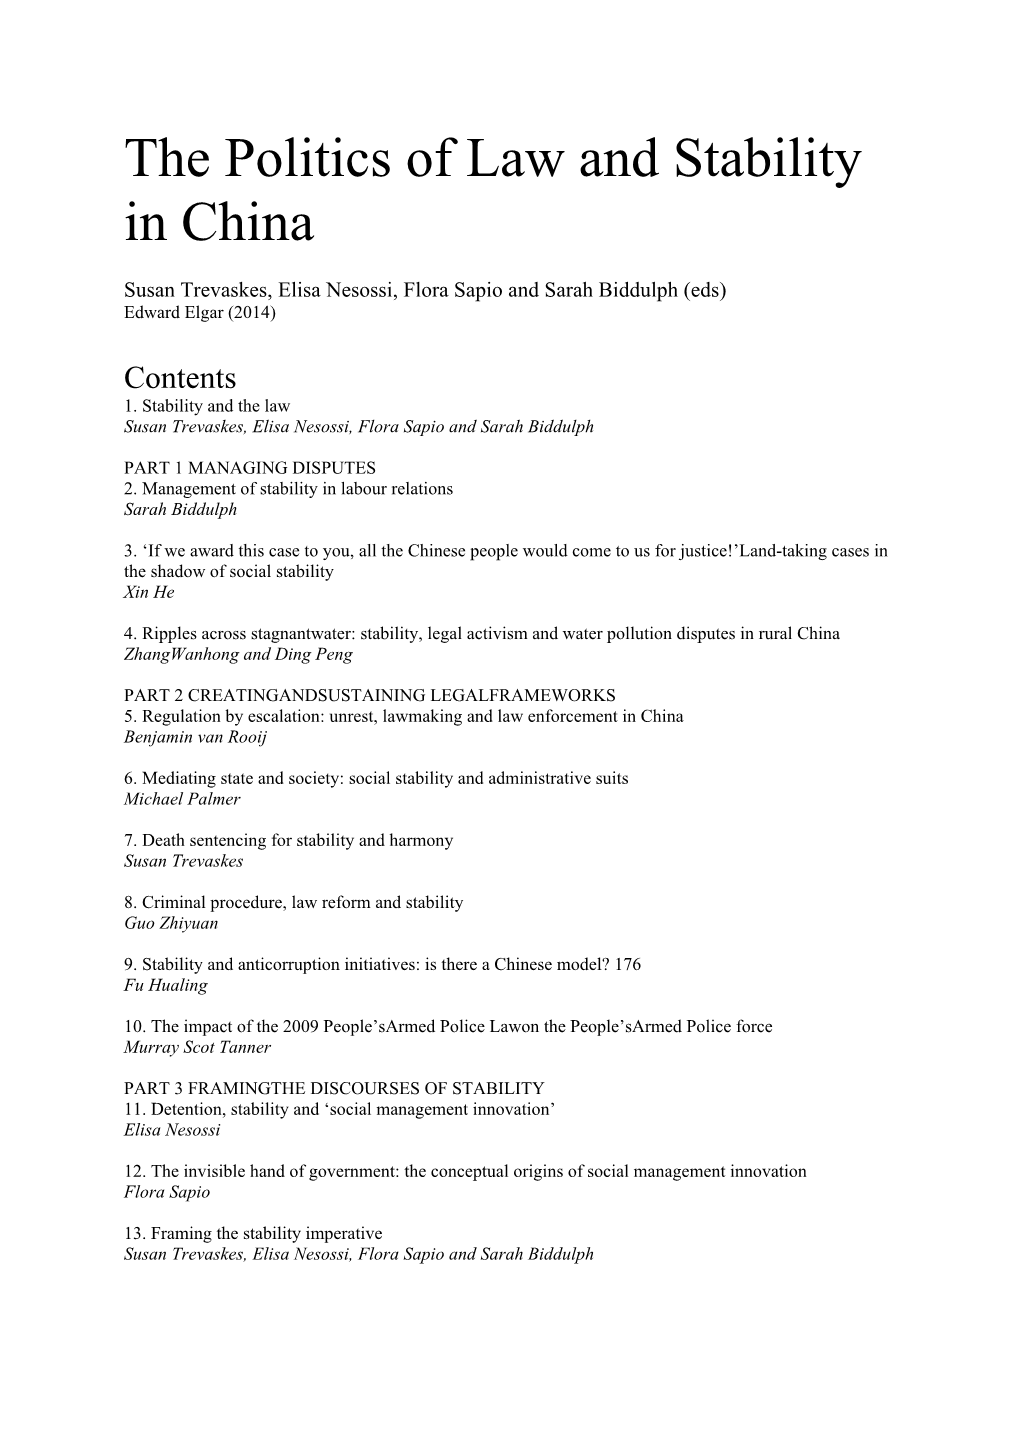 The Politics of Law and Stability in China